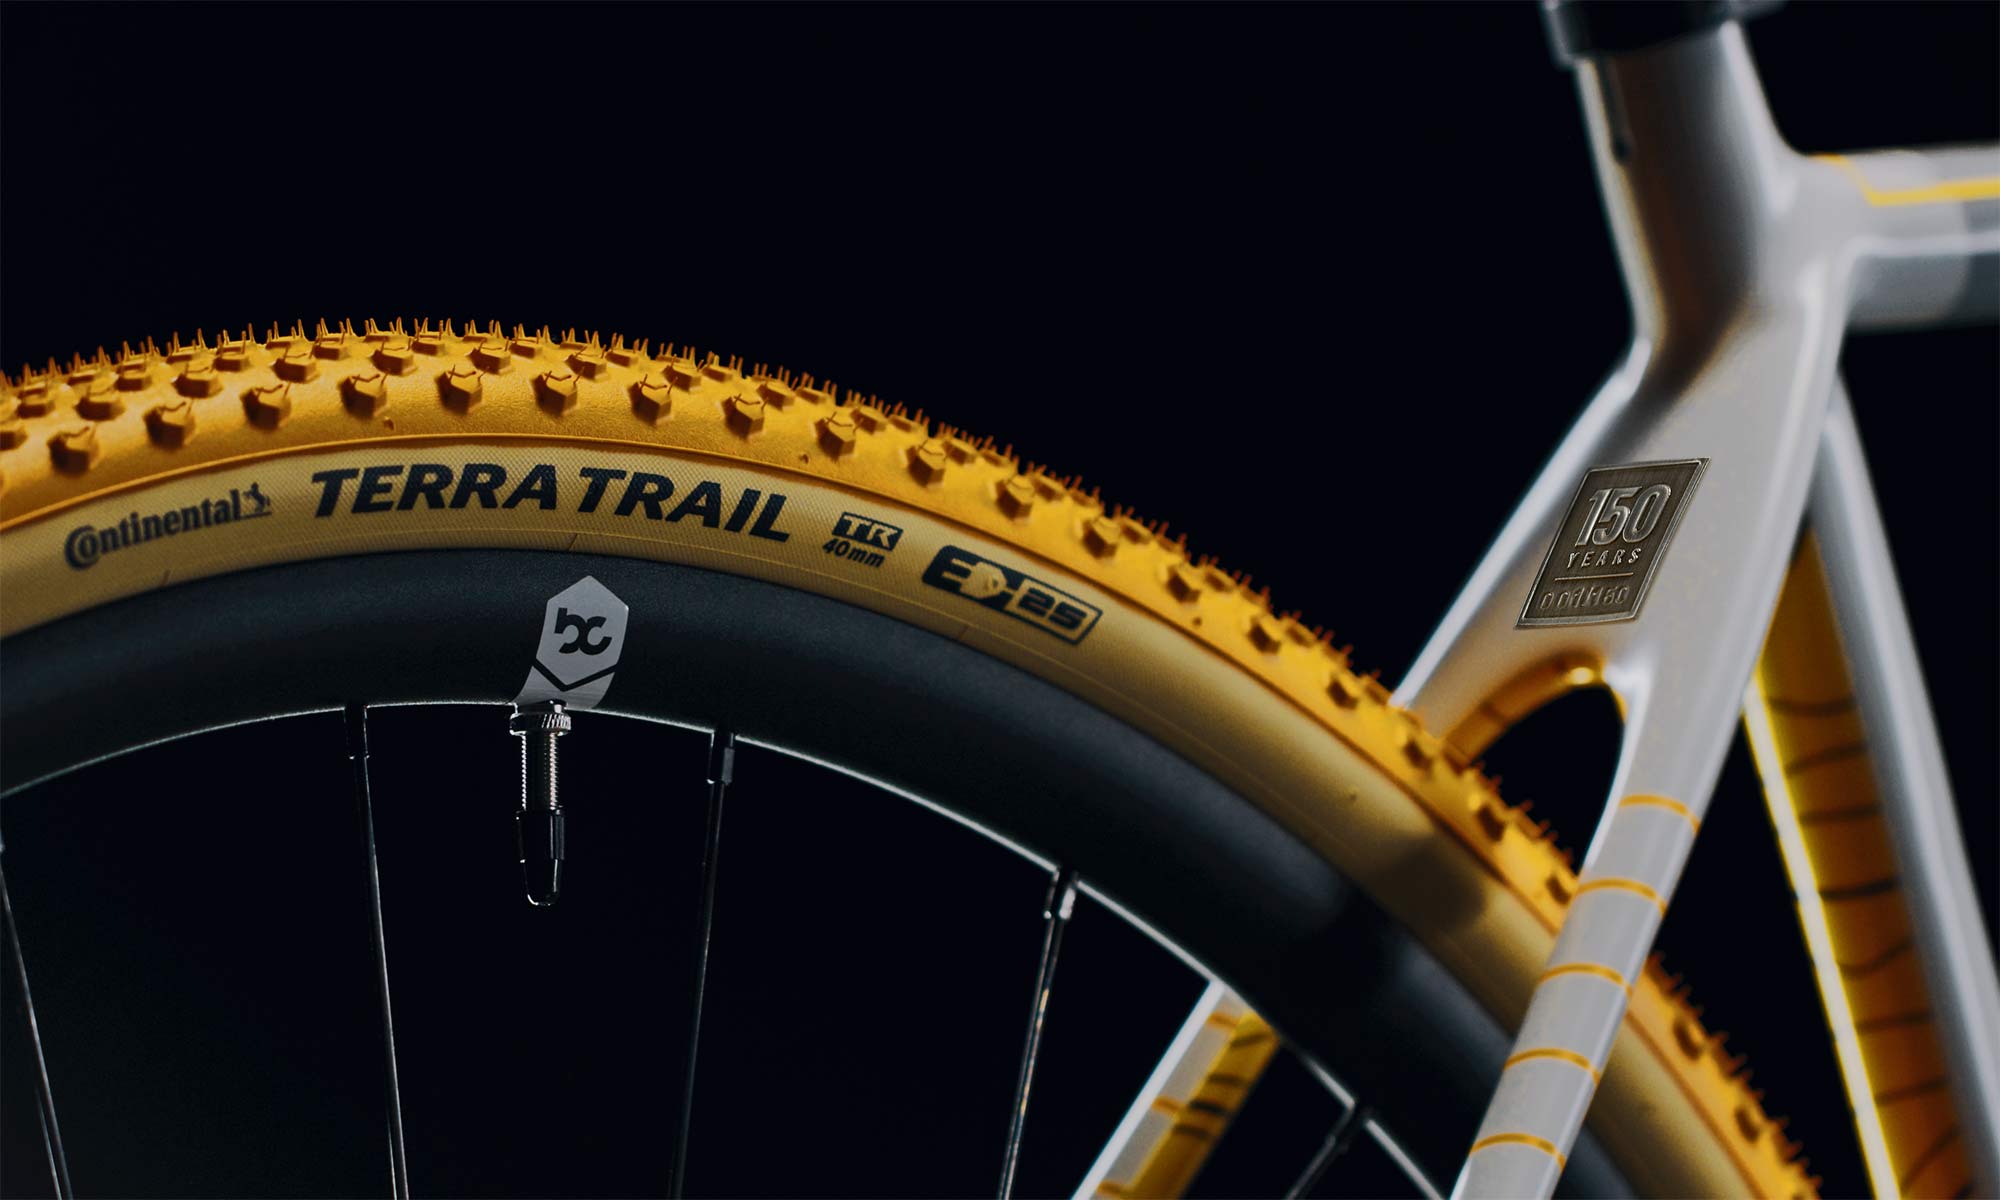 Continental 150th limited edition Terra Trail tires on a OPEN UP gravel bike, teaser